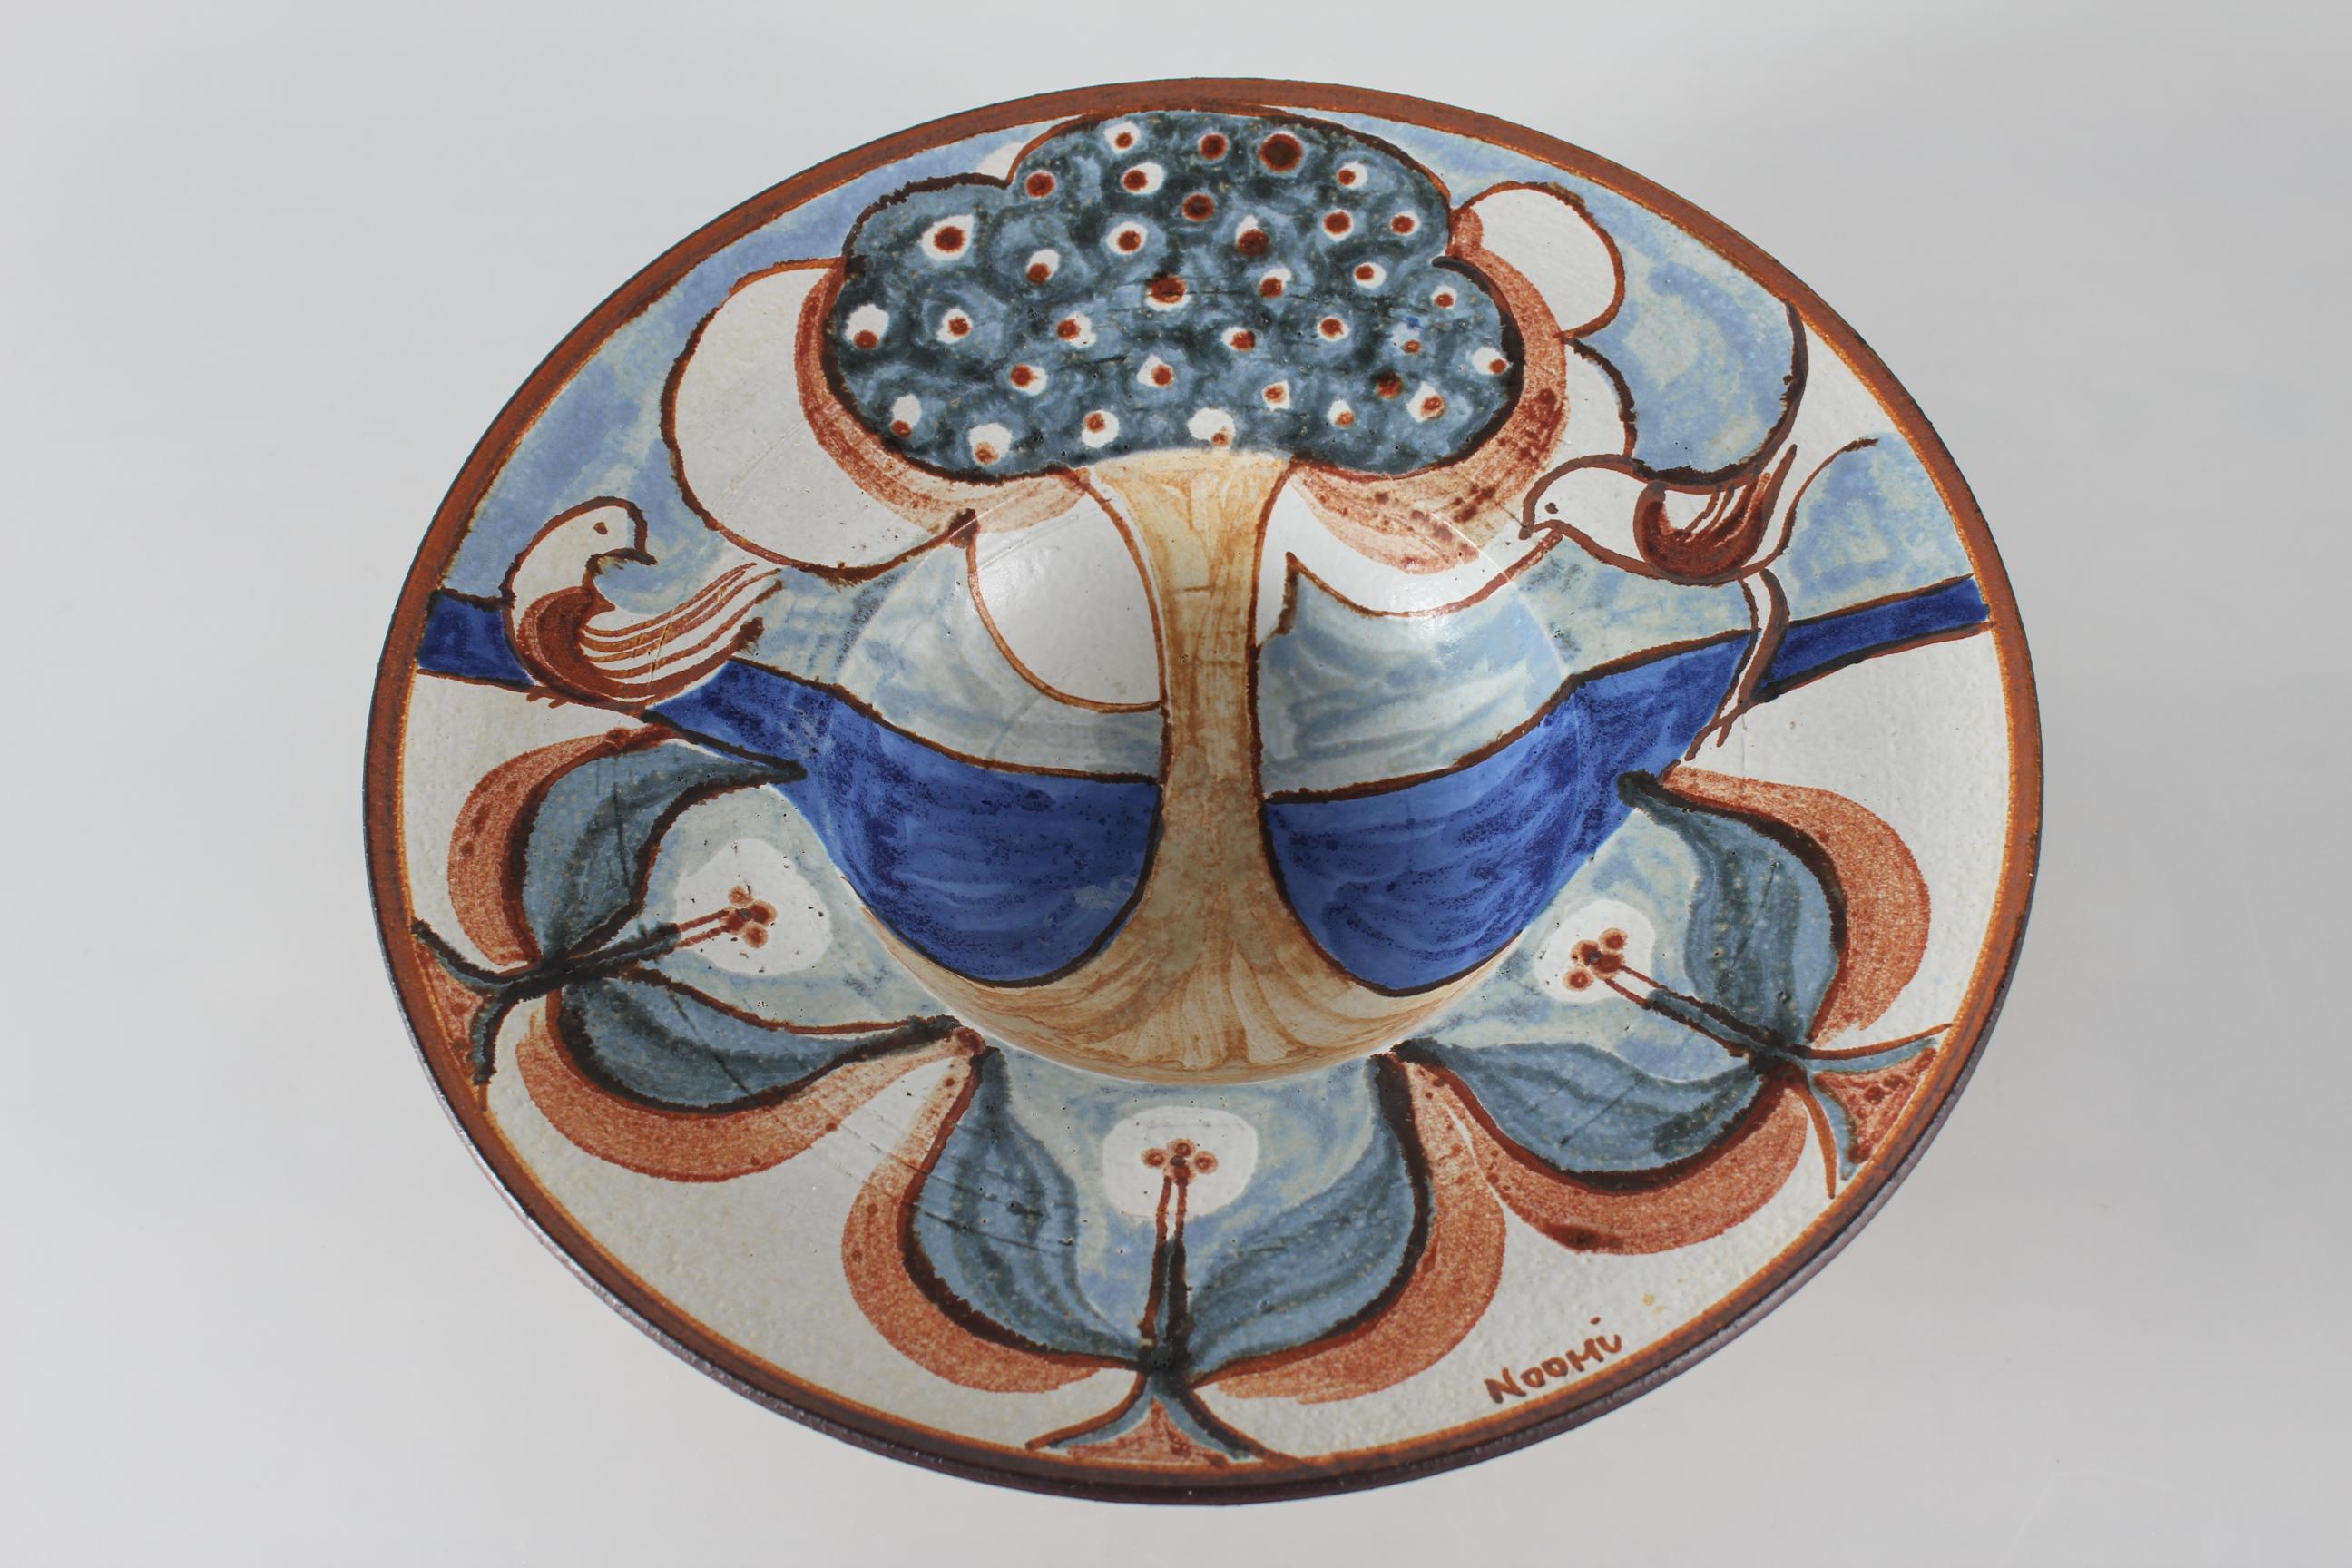 Huge ceramic bowl by Noomi Backhausen for Søholm Denmark.
This bowl with the tree of life motif is made of chamotte clay which gives it a vivid surface. 
It's decorated with off-white, brown, dark blue, light blue, and green colors and the glaze